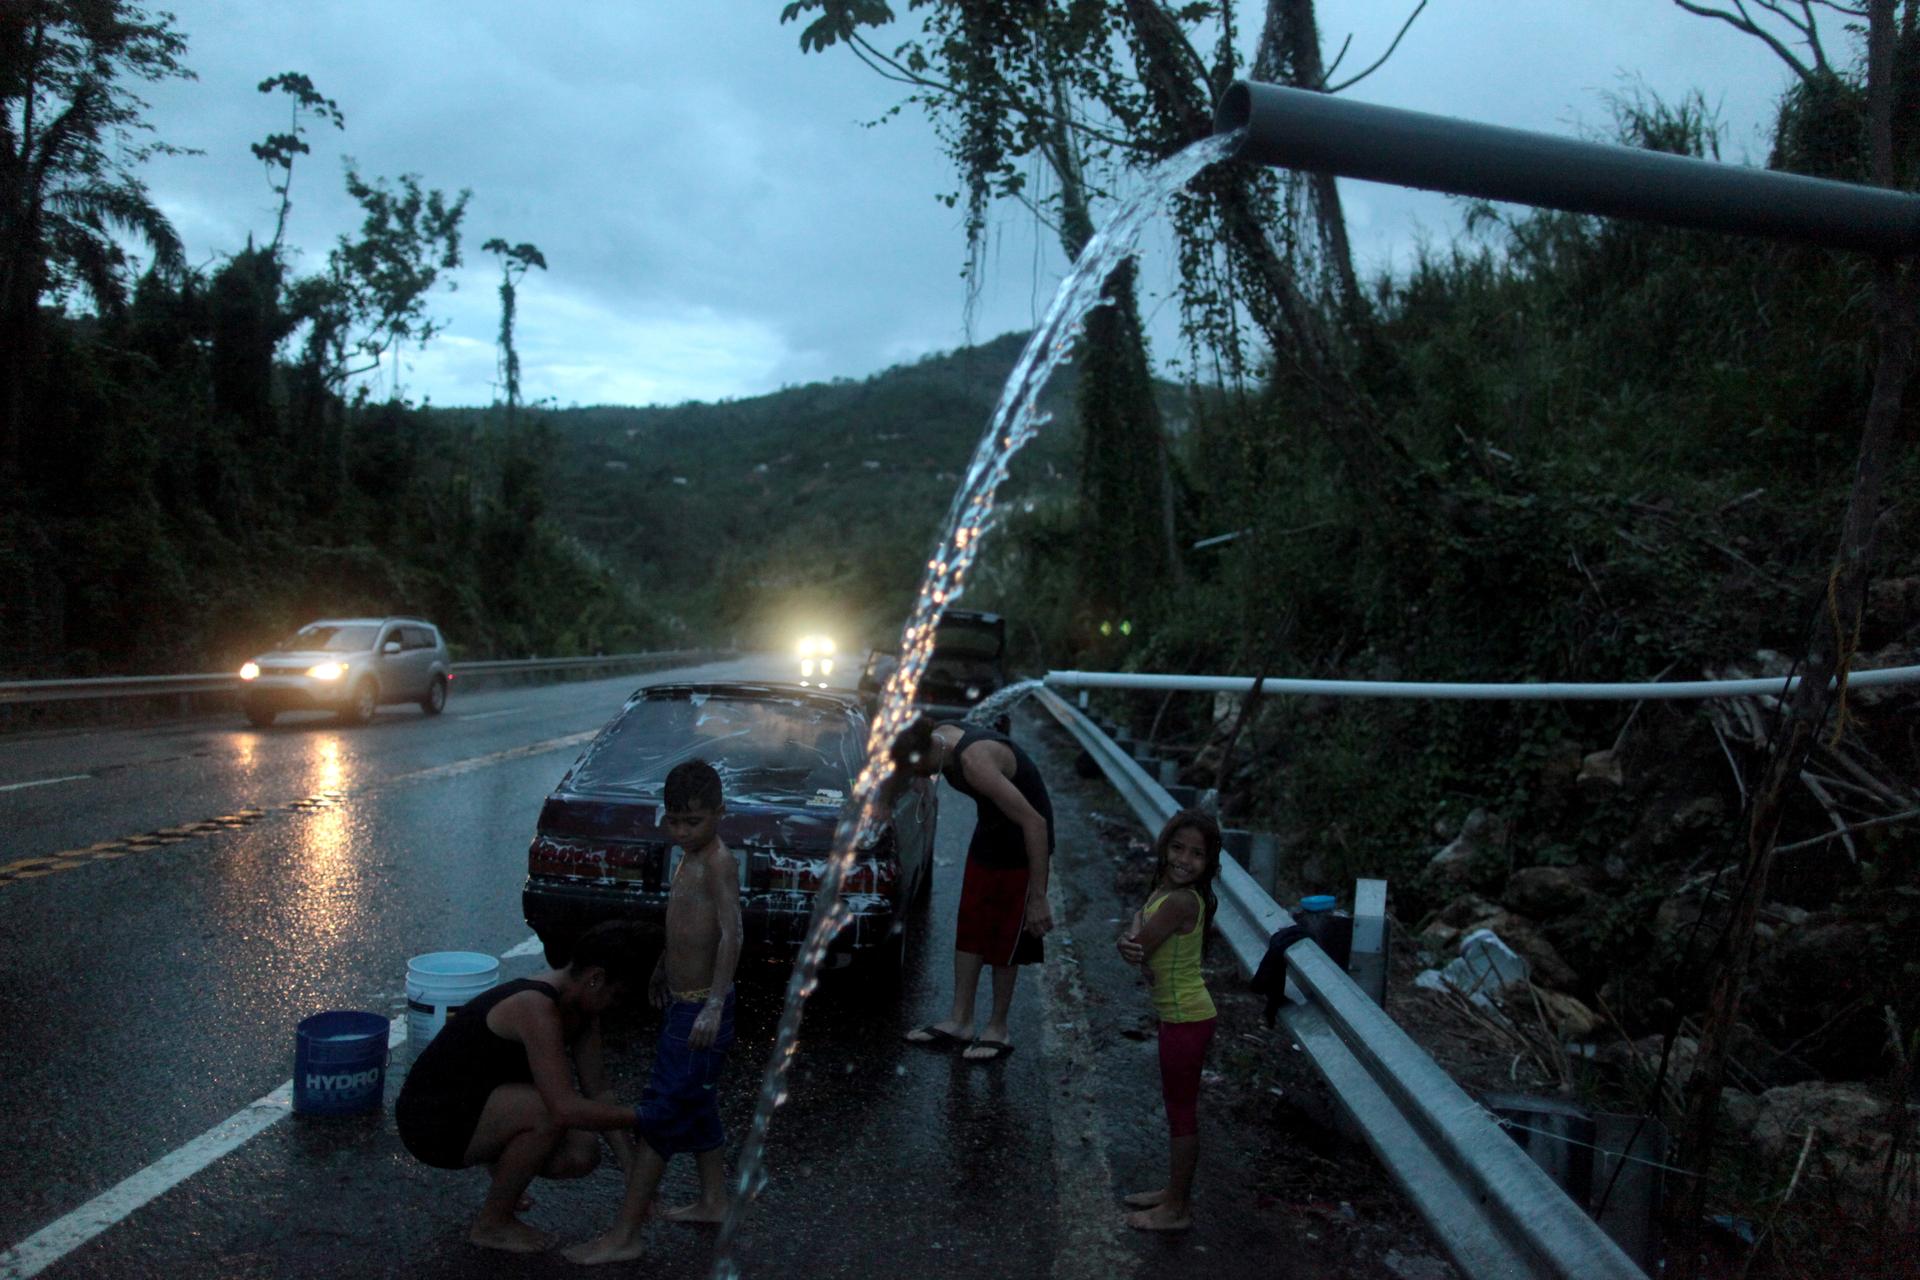 A family bathe and wash their car with mountain spring water after hurricane Maria hit the area in September, in Utuado, Puerto Rico.